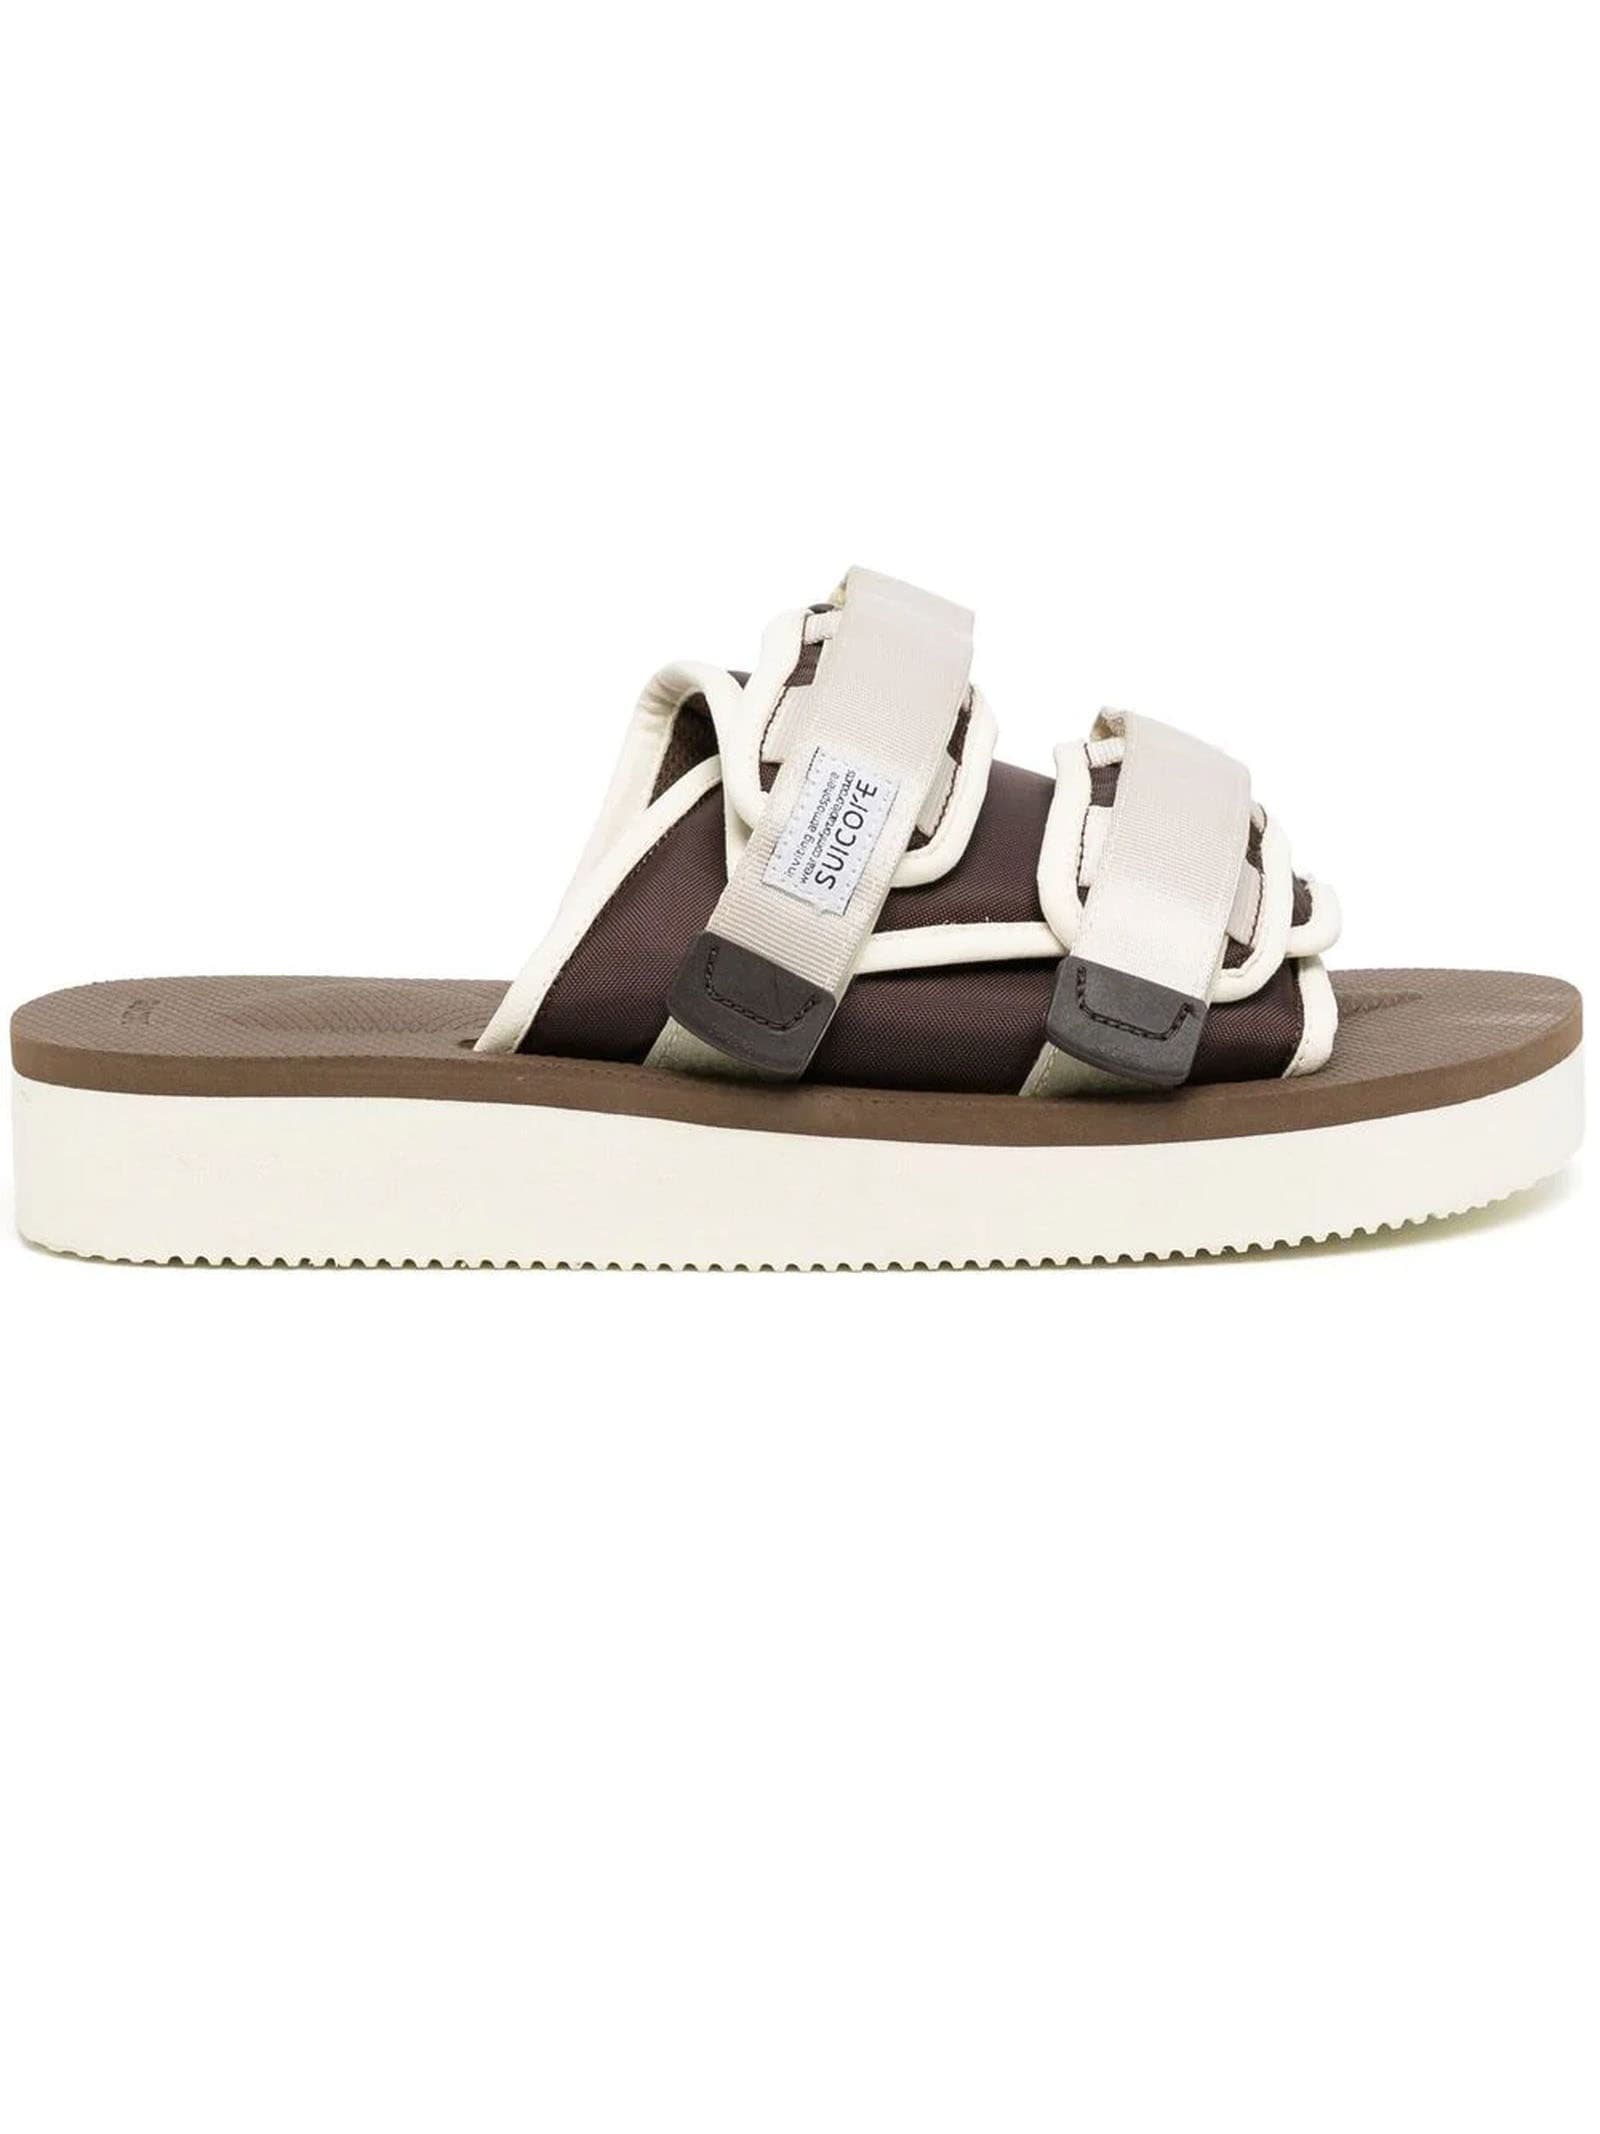 SUICOKE MOTO BROWN AND BEIGE SANDALS